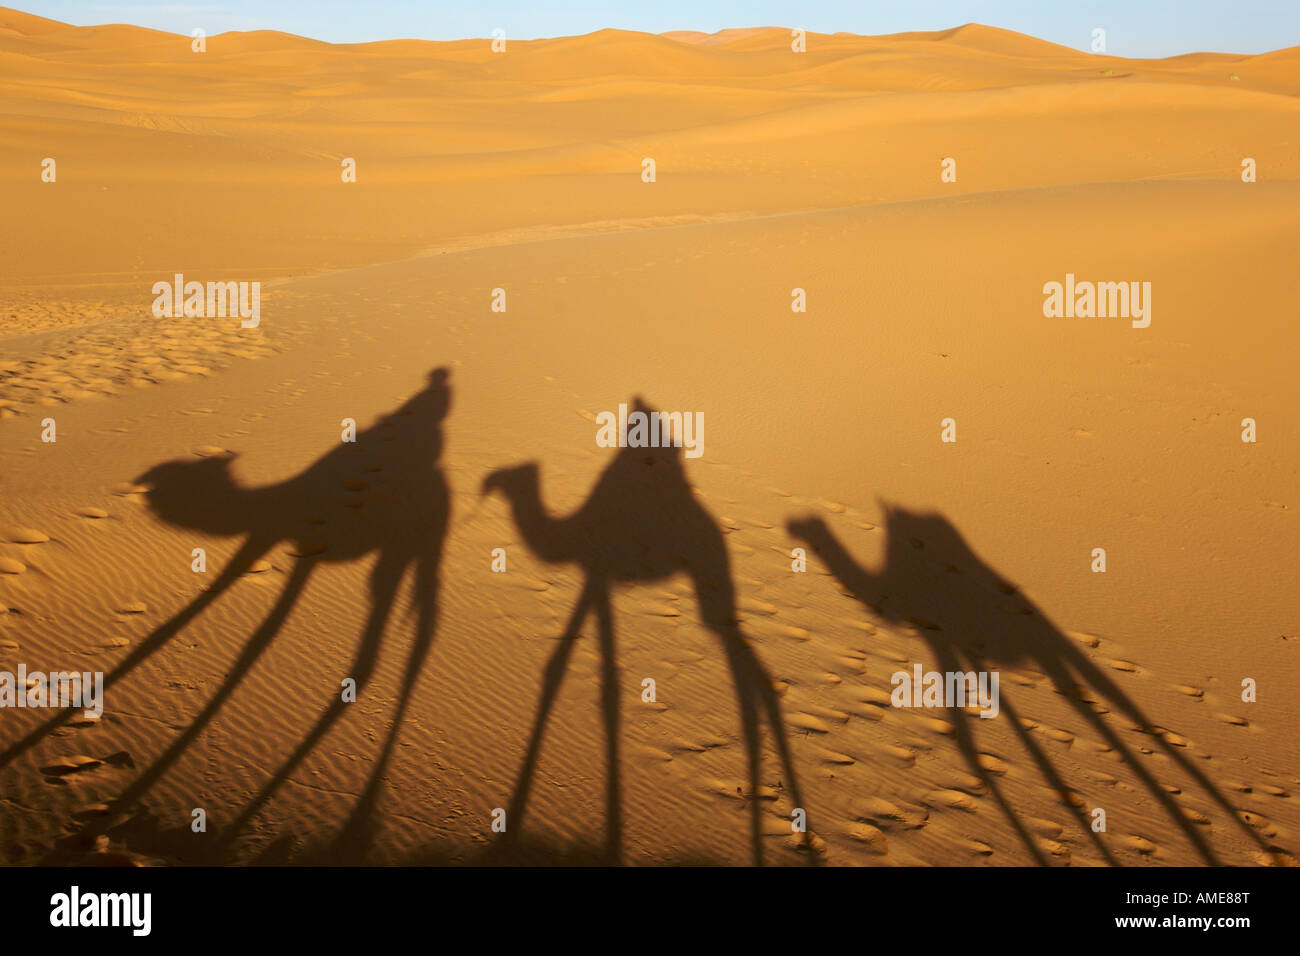 Shadow of three dromedary camels in the sand dunes of Erg Chebbi near Merzouga in eastern Morocco. Stock Photo